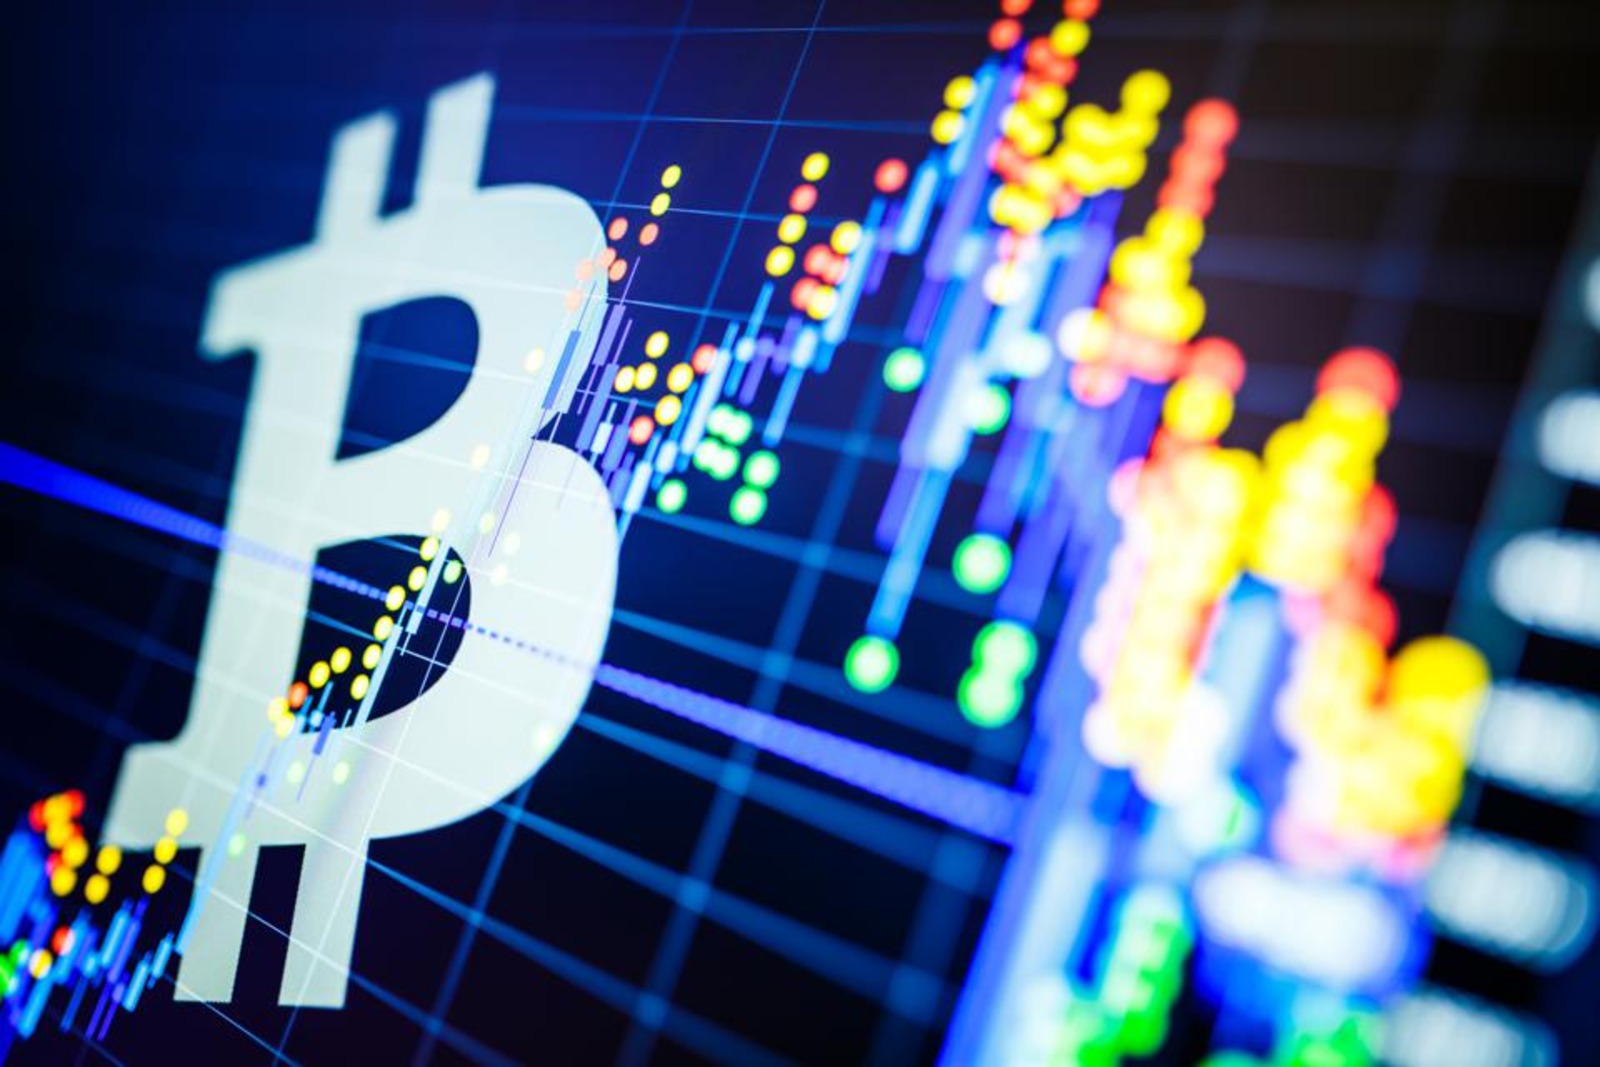 Stocks have more to bleed while Bitcoin retests resistance below $20K